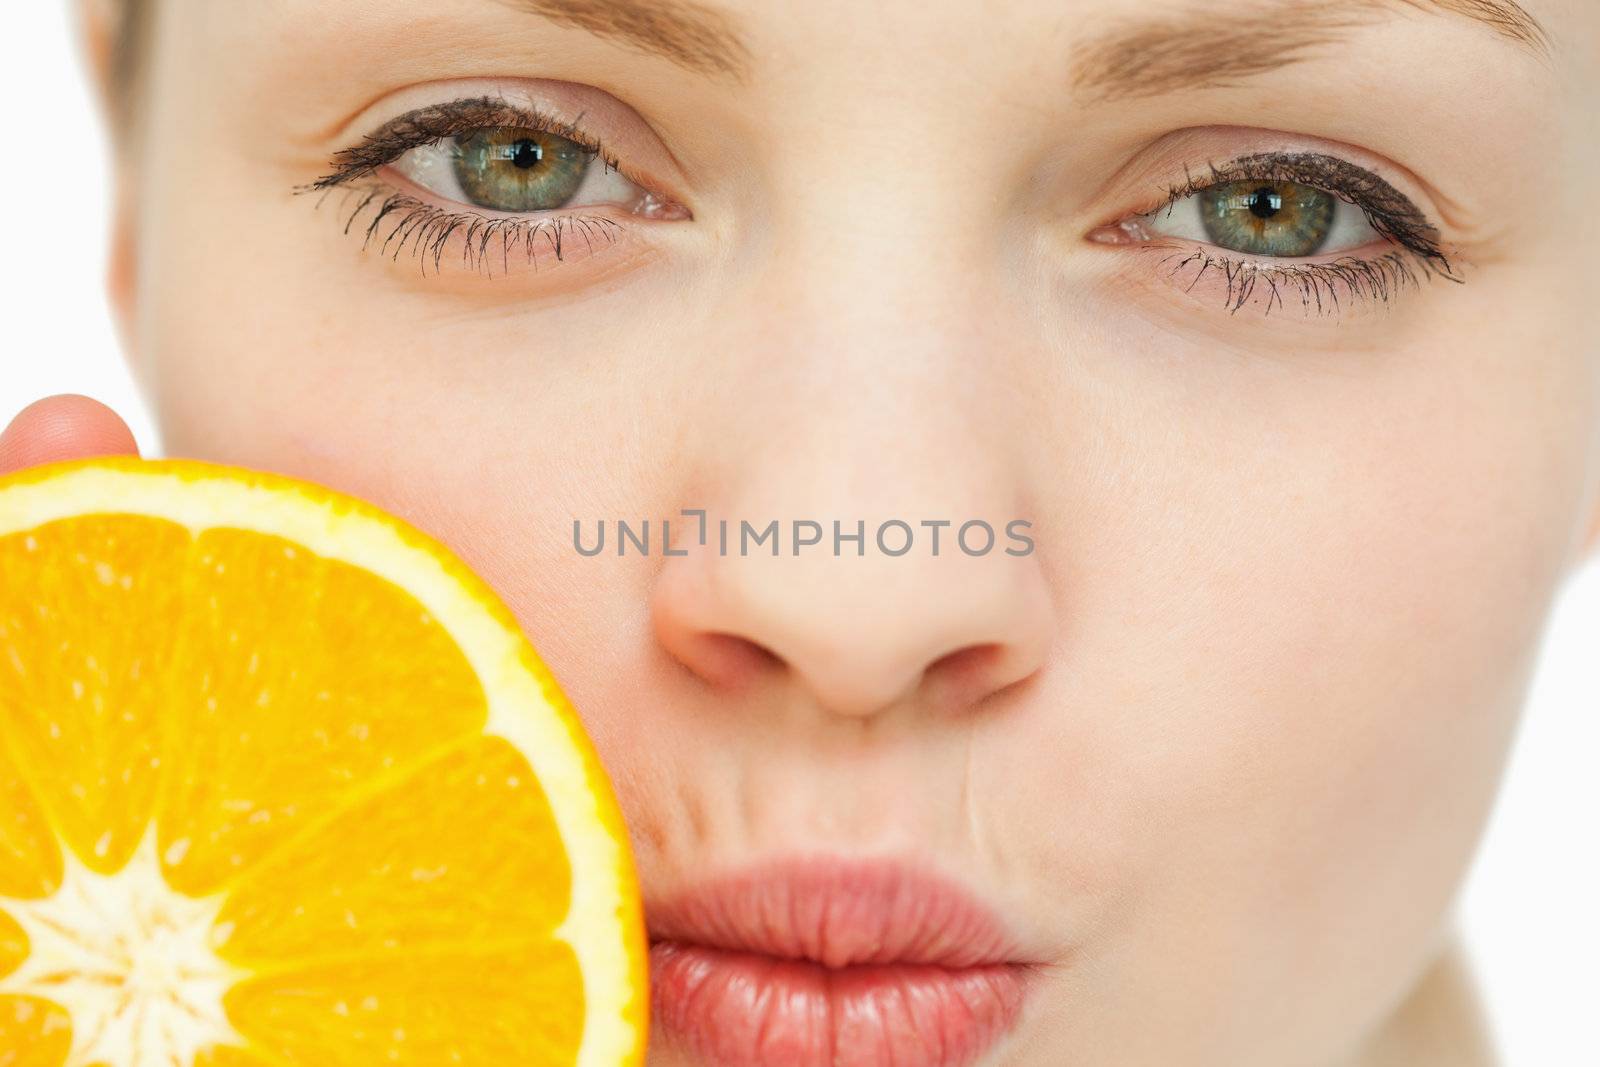 Close up of a woman placing an orange near her mouth against white background